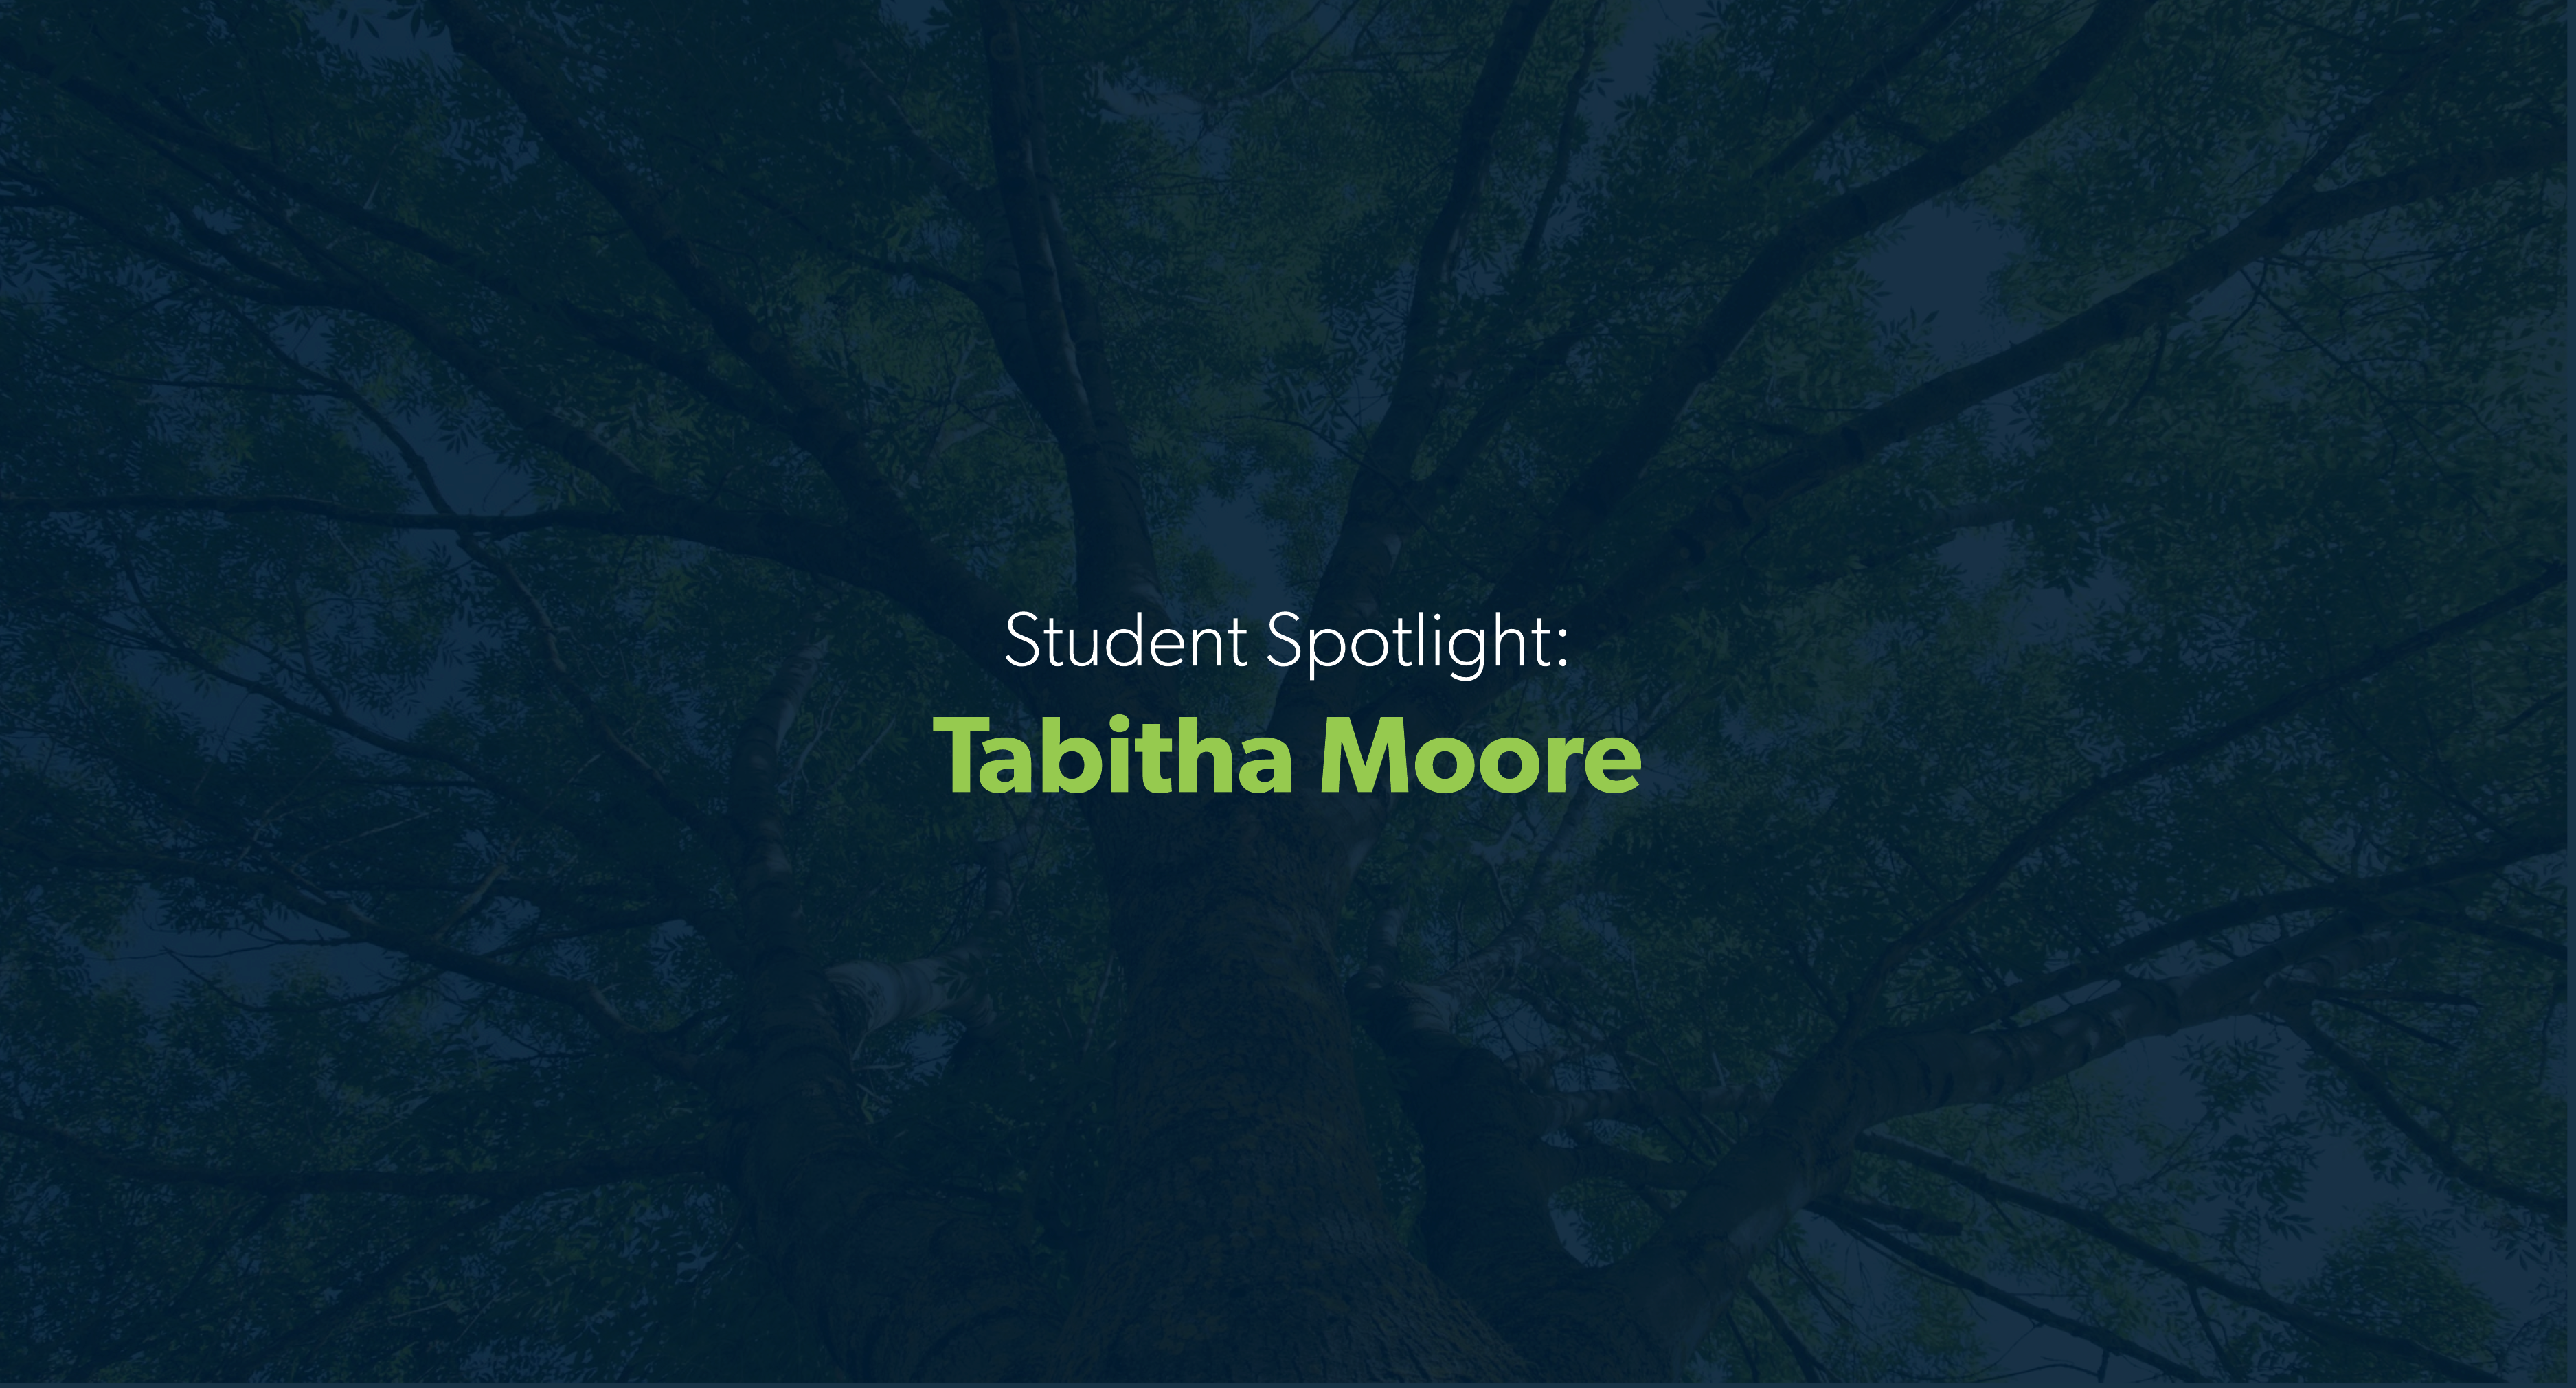 Image of tree branches with transparent navy blue overlay and white and lime green lettering